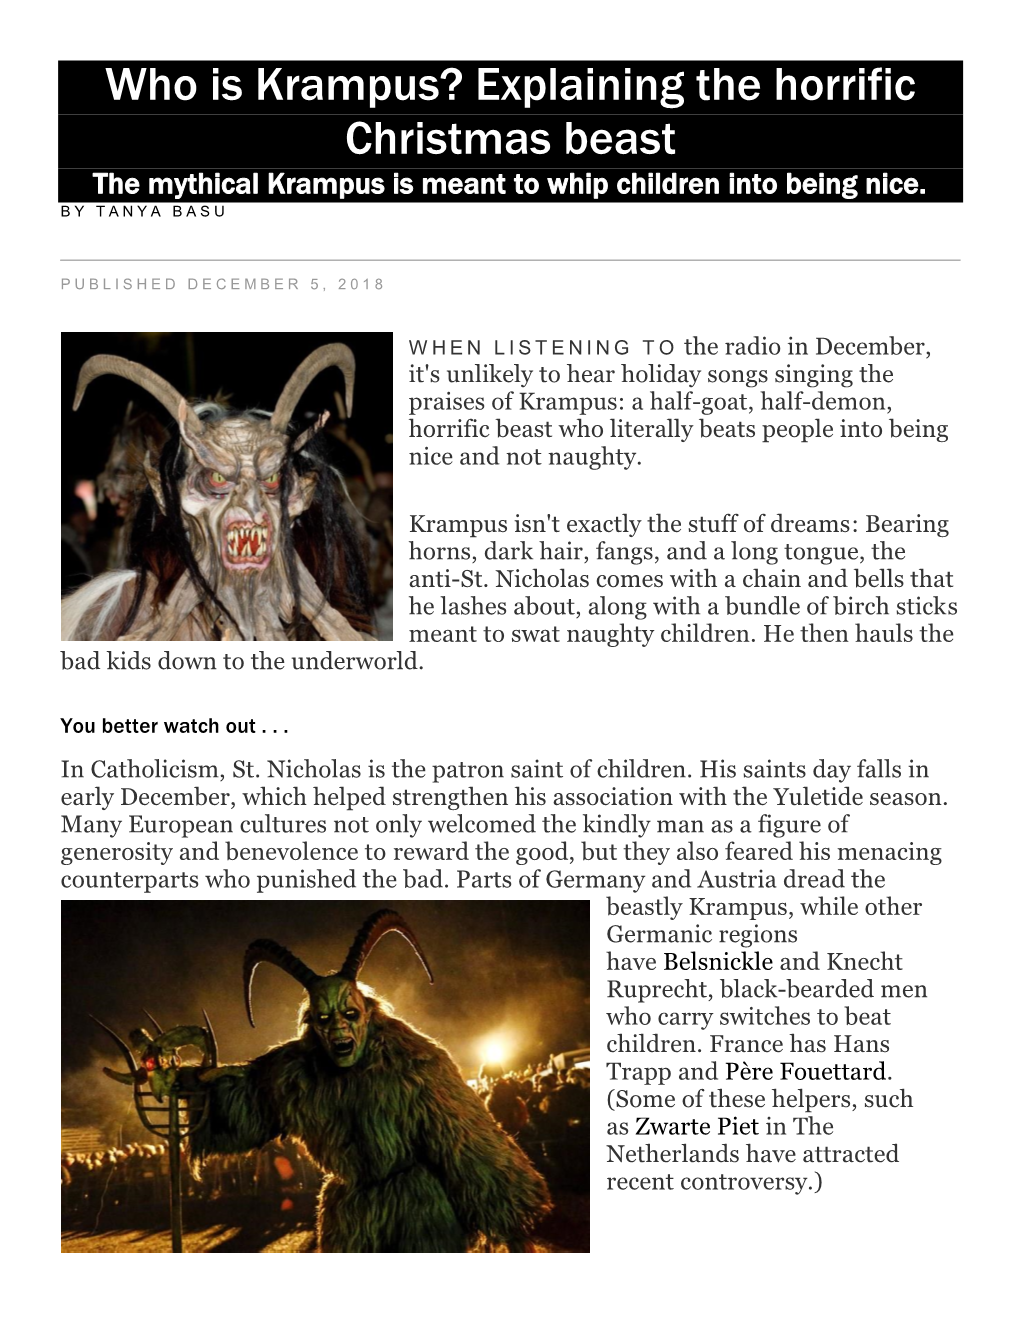 Who Is Krampus? Explaining the Horrific Christmas Beast the Mythical Krampus Is Meant to Whip Children Into Being Nice